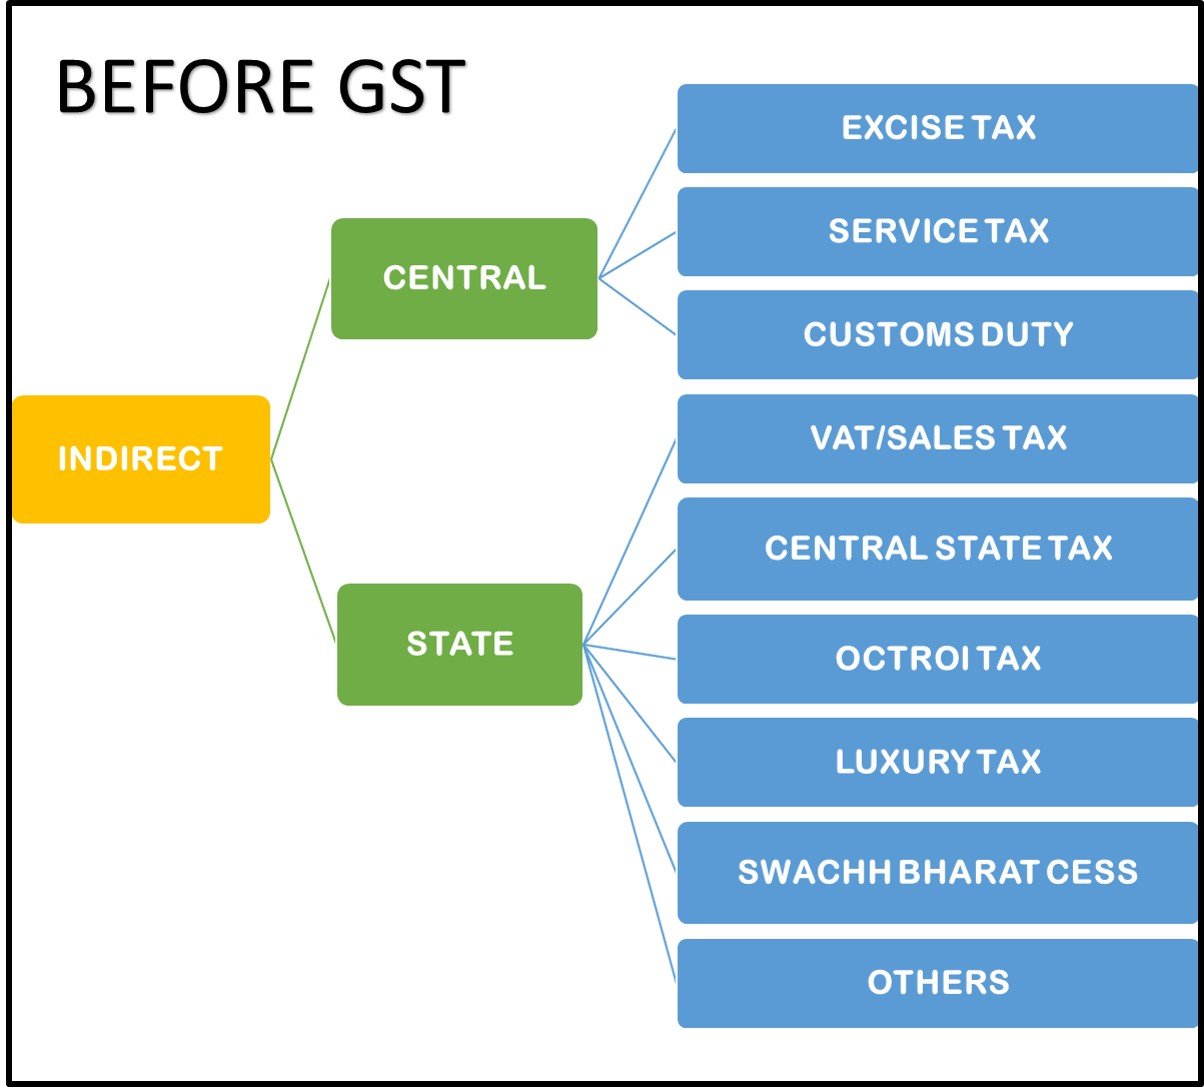 What changes GST has brought to India